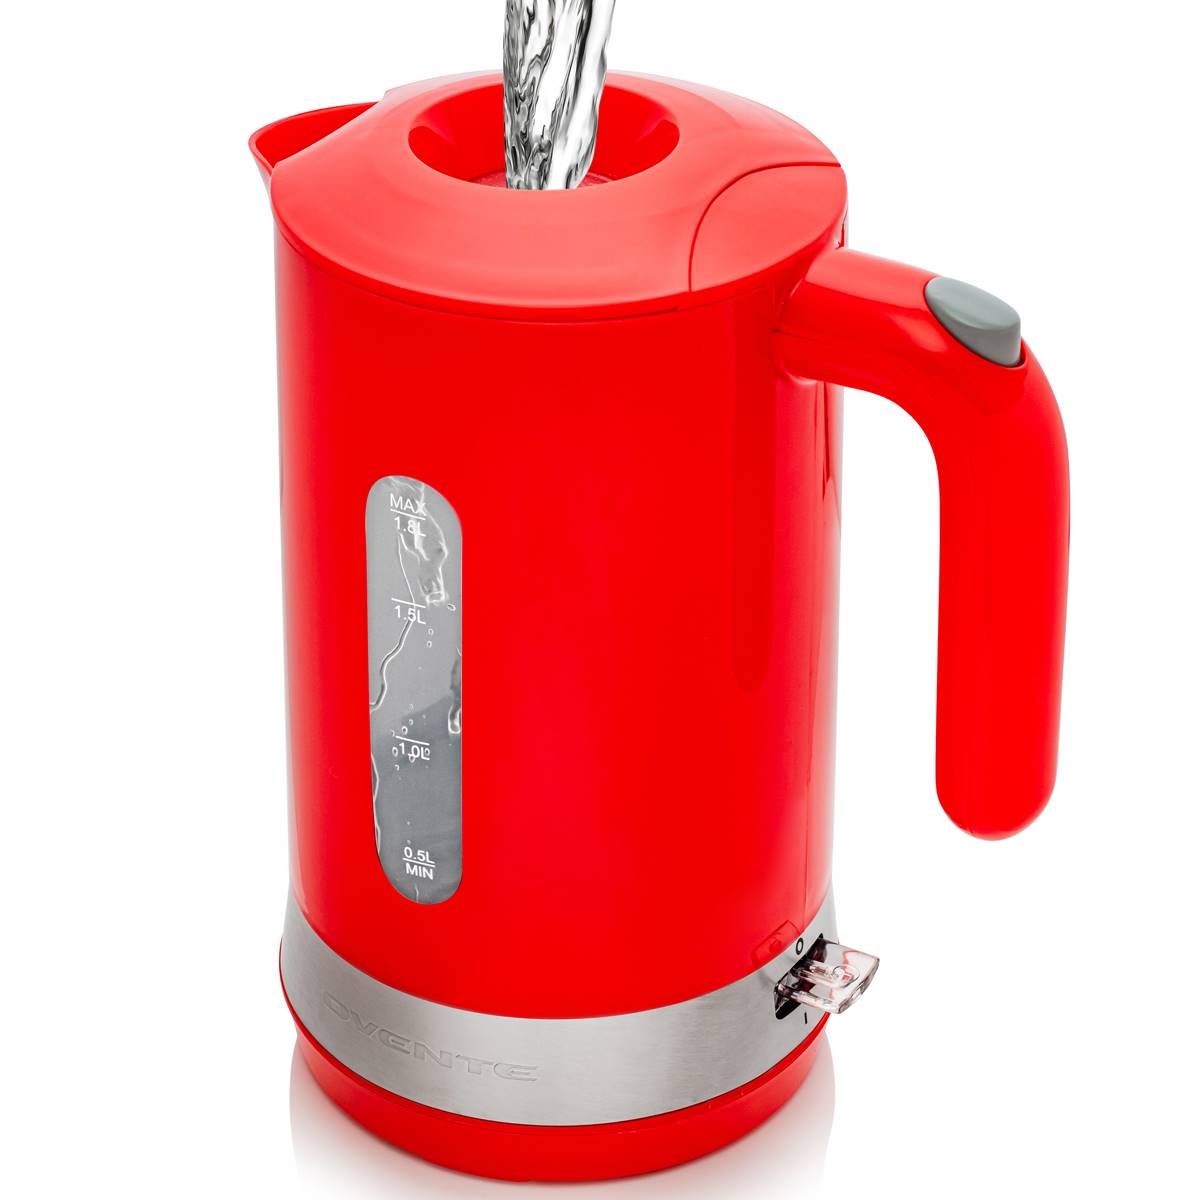 Ovente 1.8 Liter Electric Kettle W/ ProntoFill(tm) Lid - Red